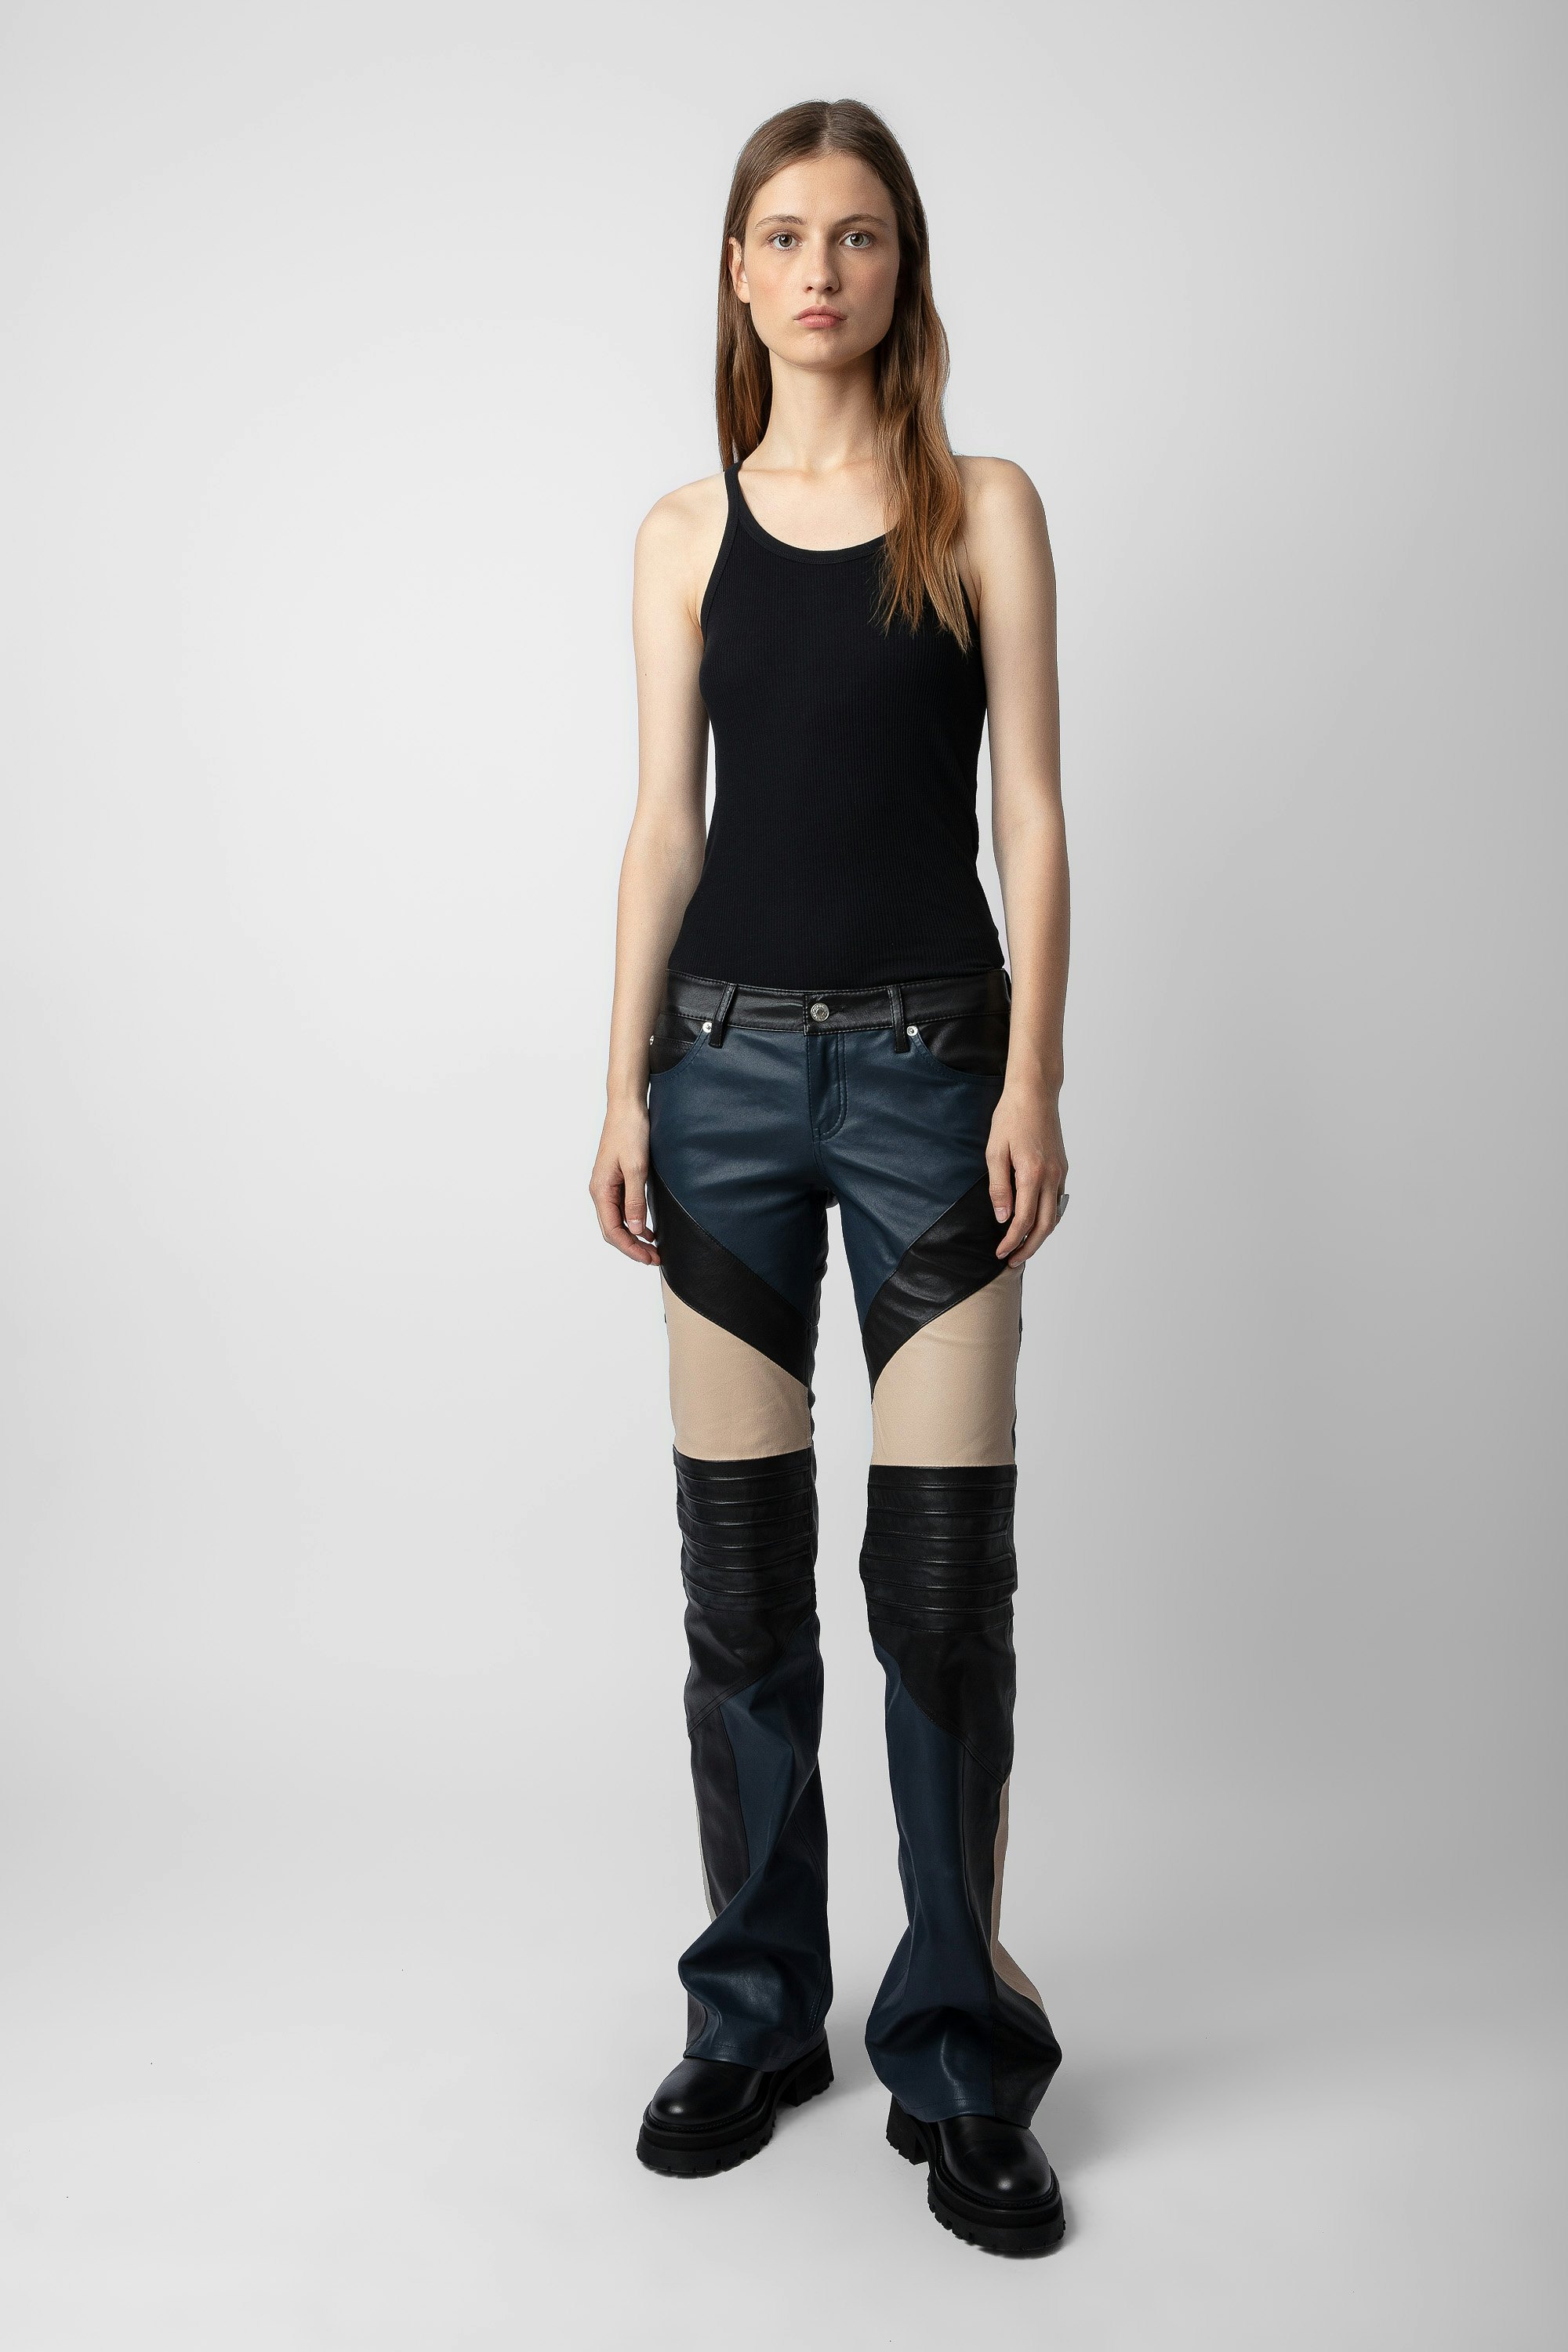 Paulin Leather Trousers - Women’s black contrasting leather trousers with overstitched details.